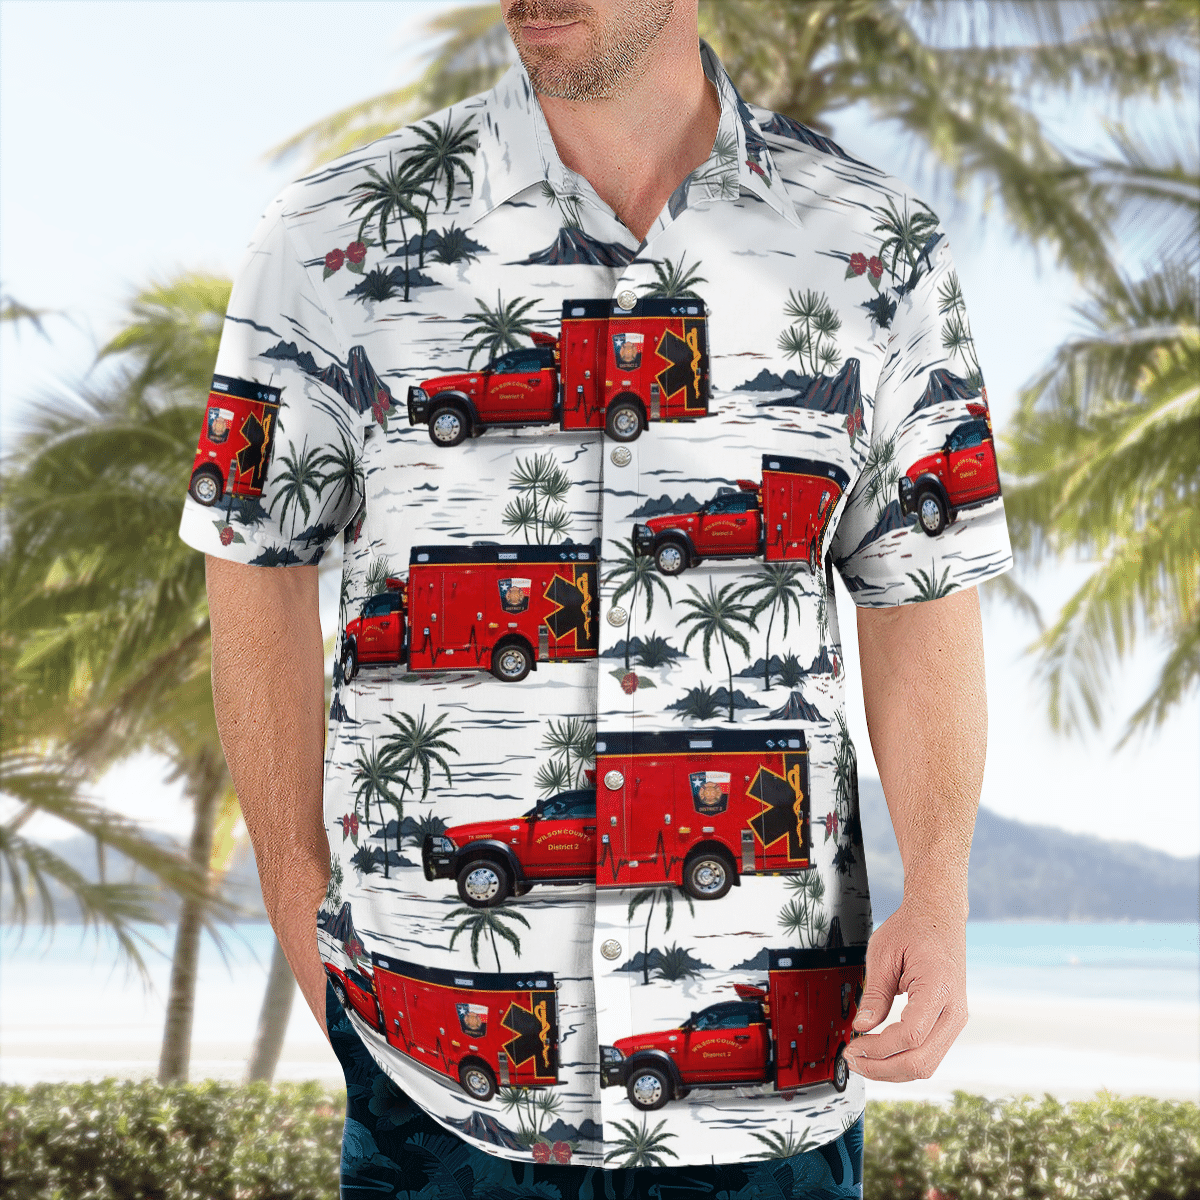 There are several styles of beach and Hawaiian shorts and tops to choose from 33